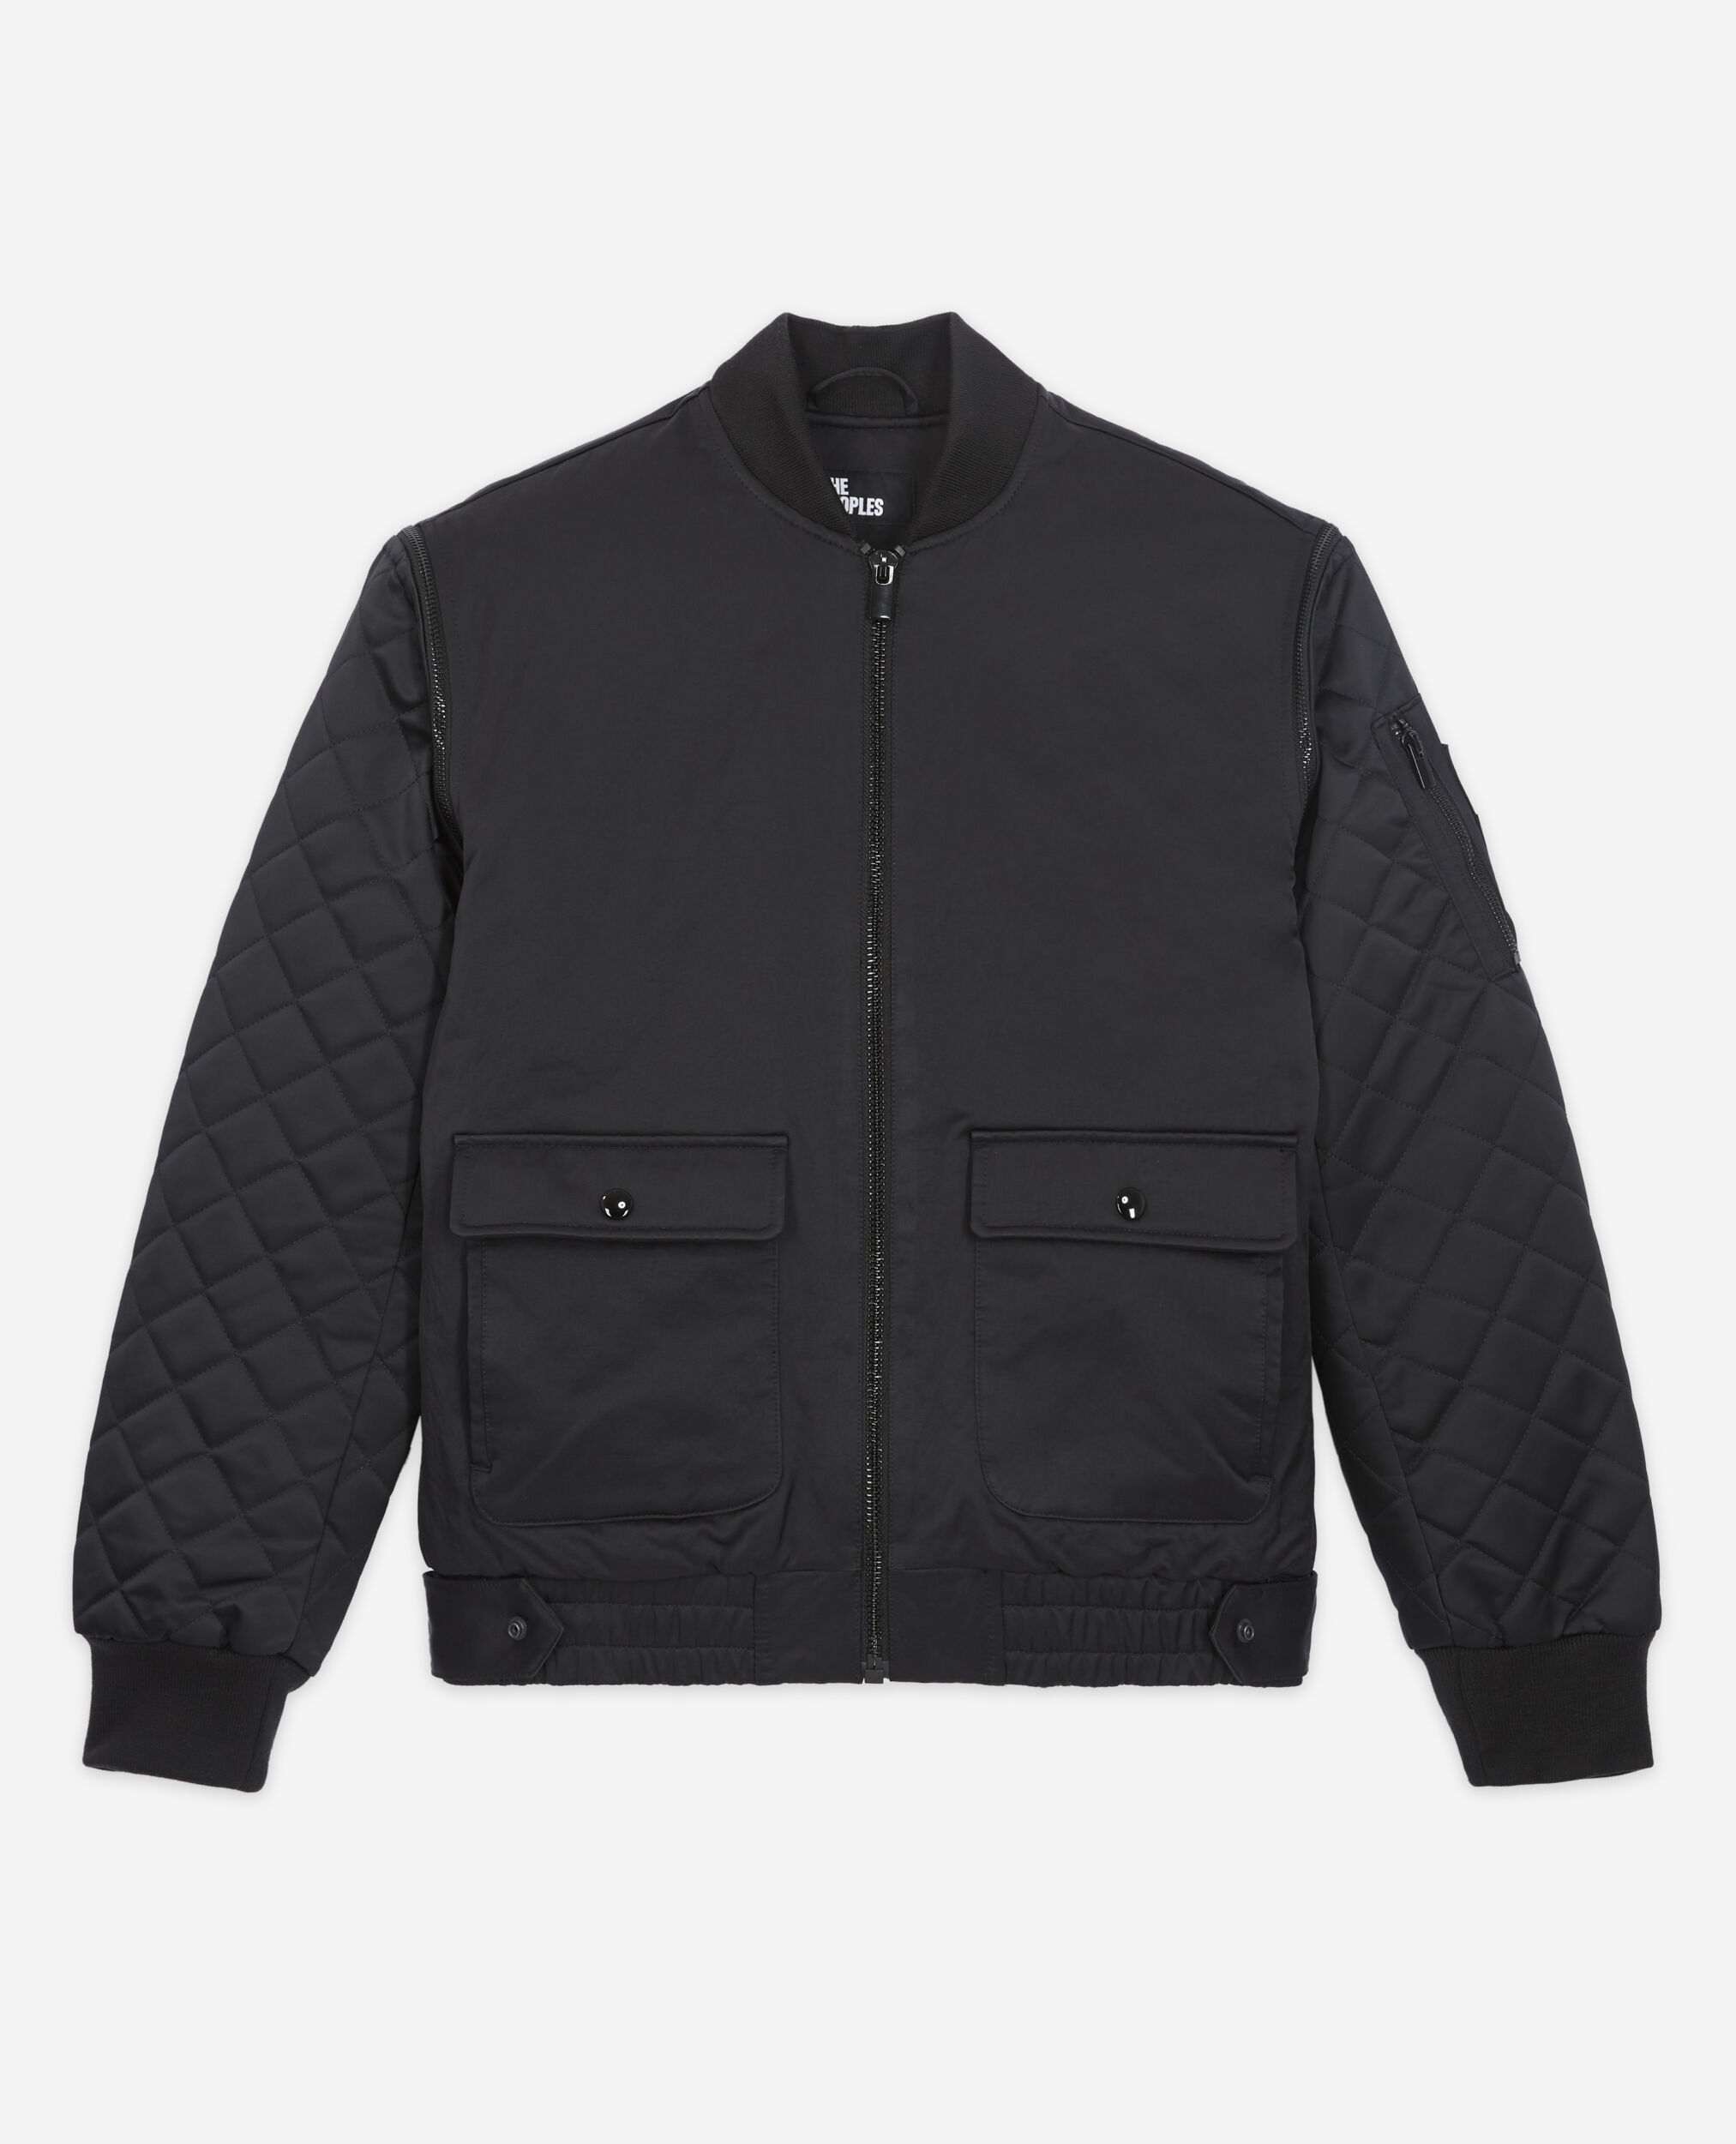 Bombers manches amovibles satiné noir, BLACK, hi-res image number null